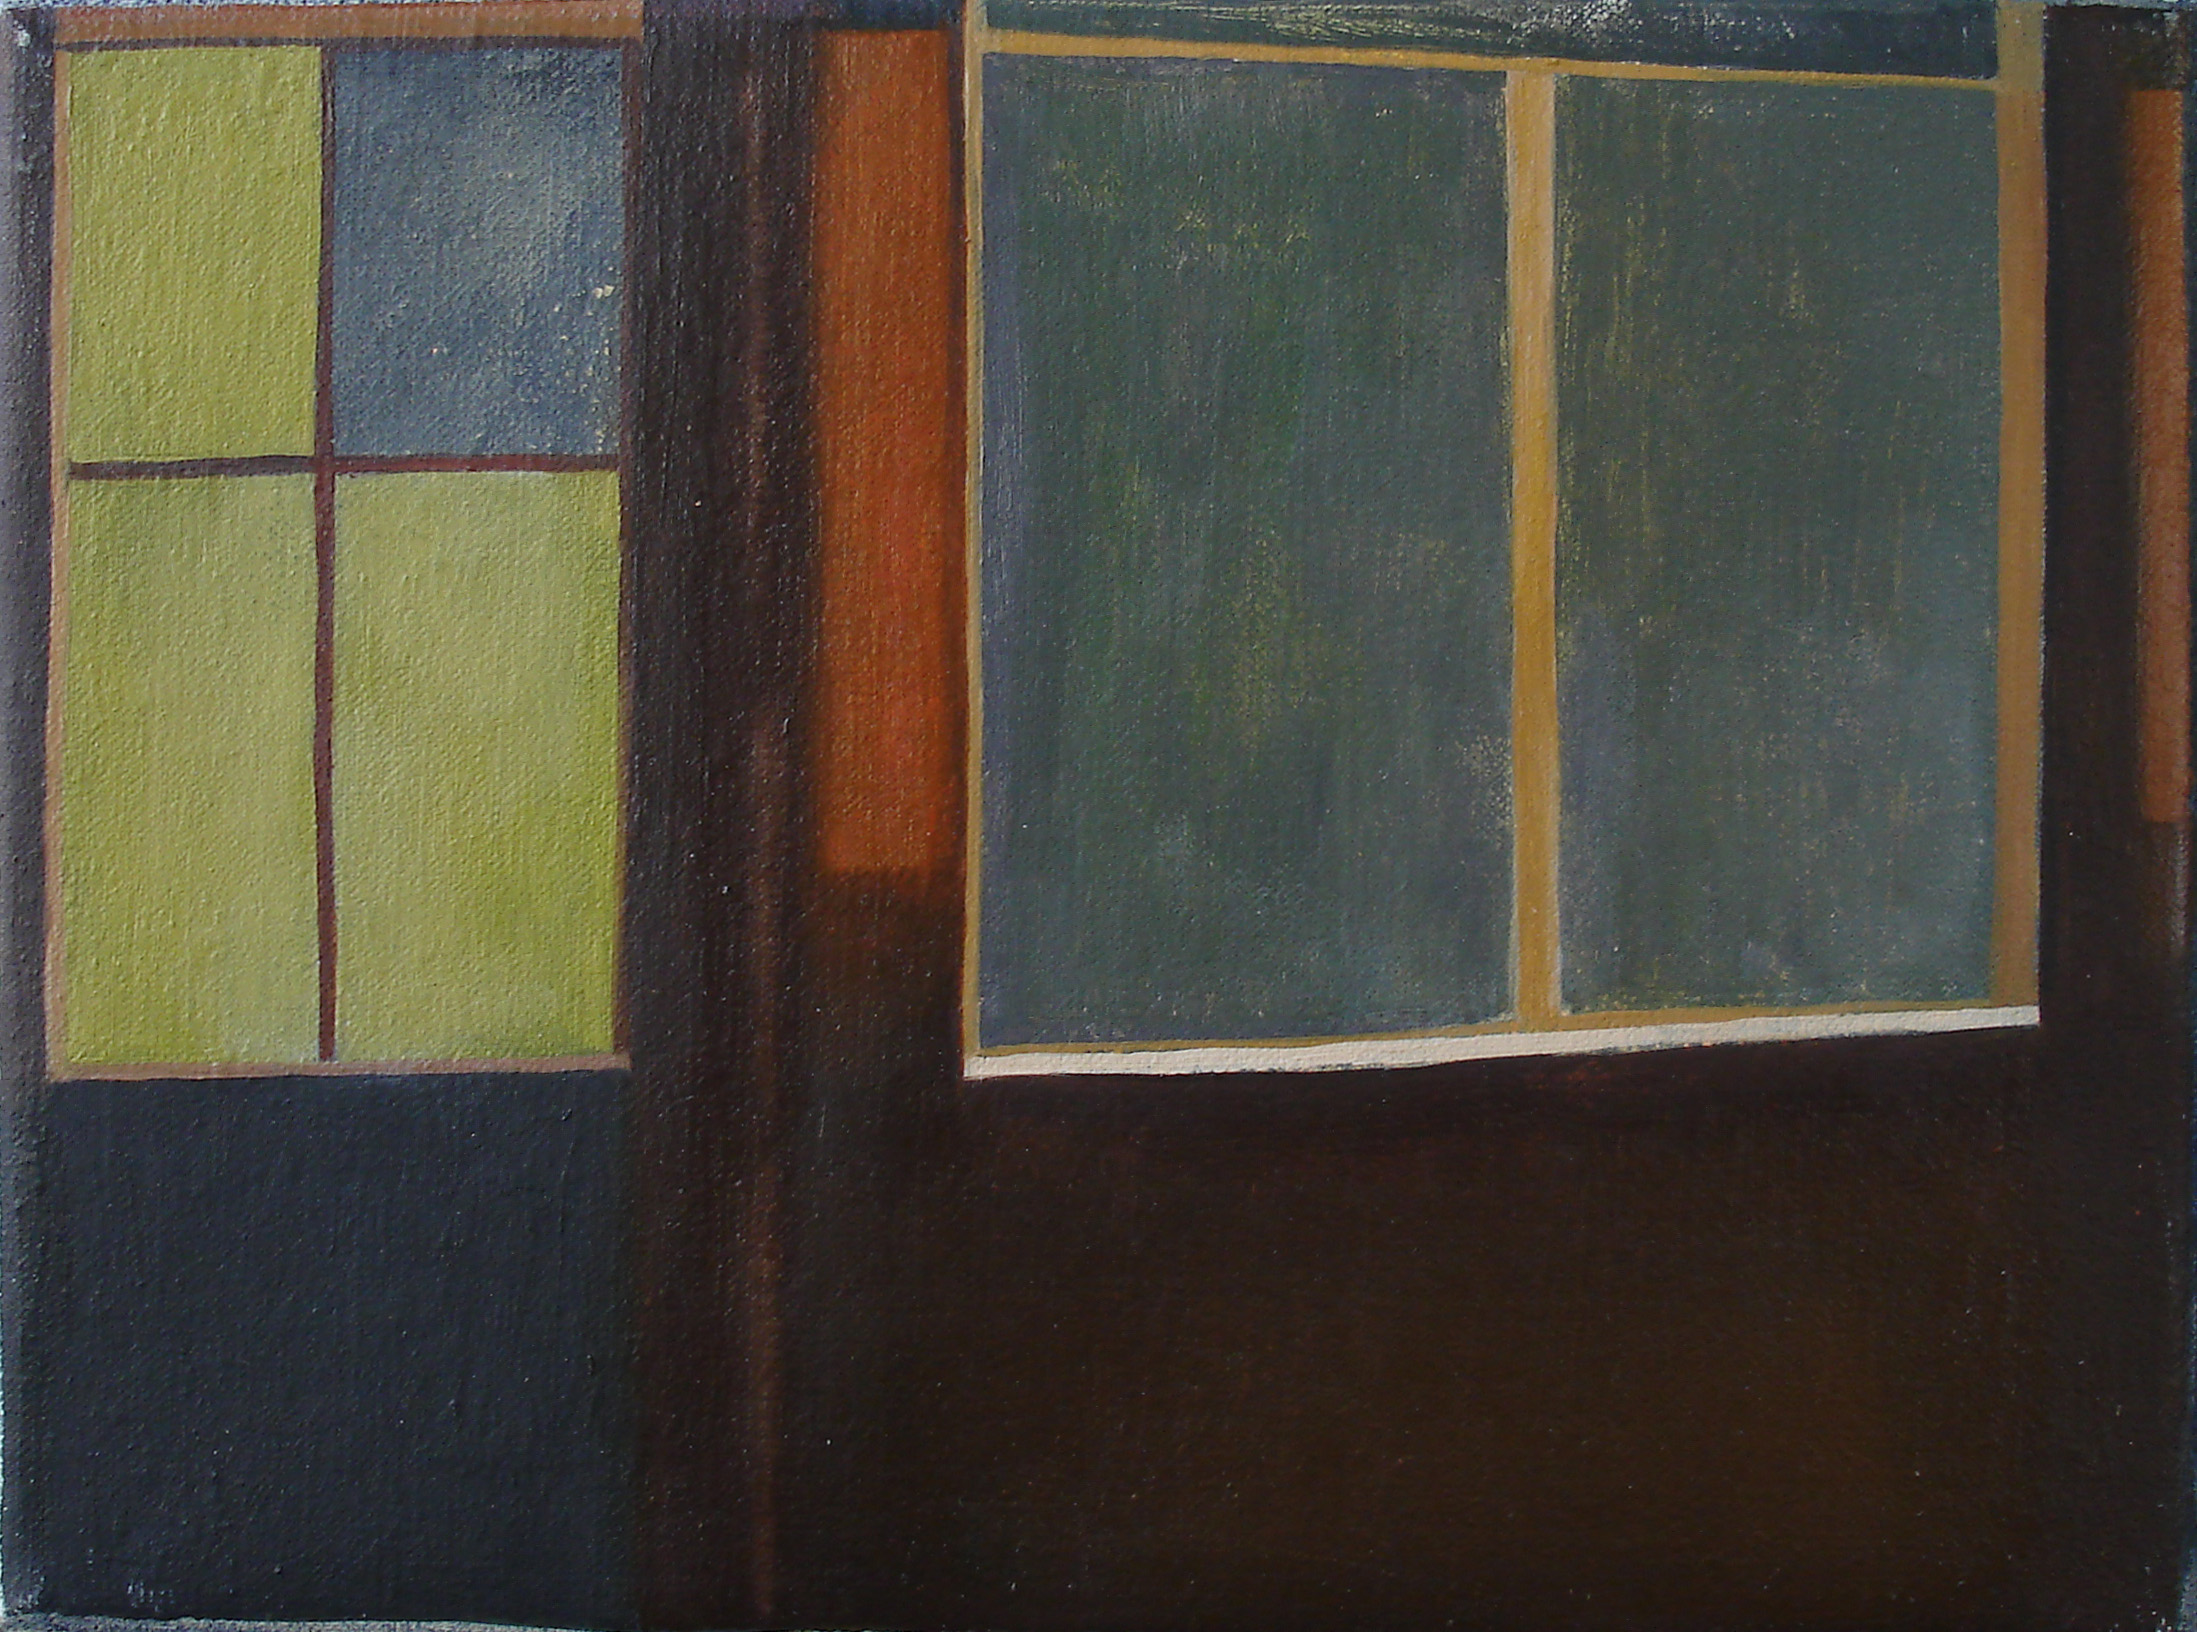   Untitled    2004, oil on canvas, 15 x 20cm  